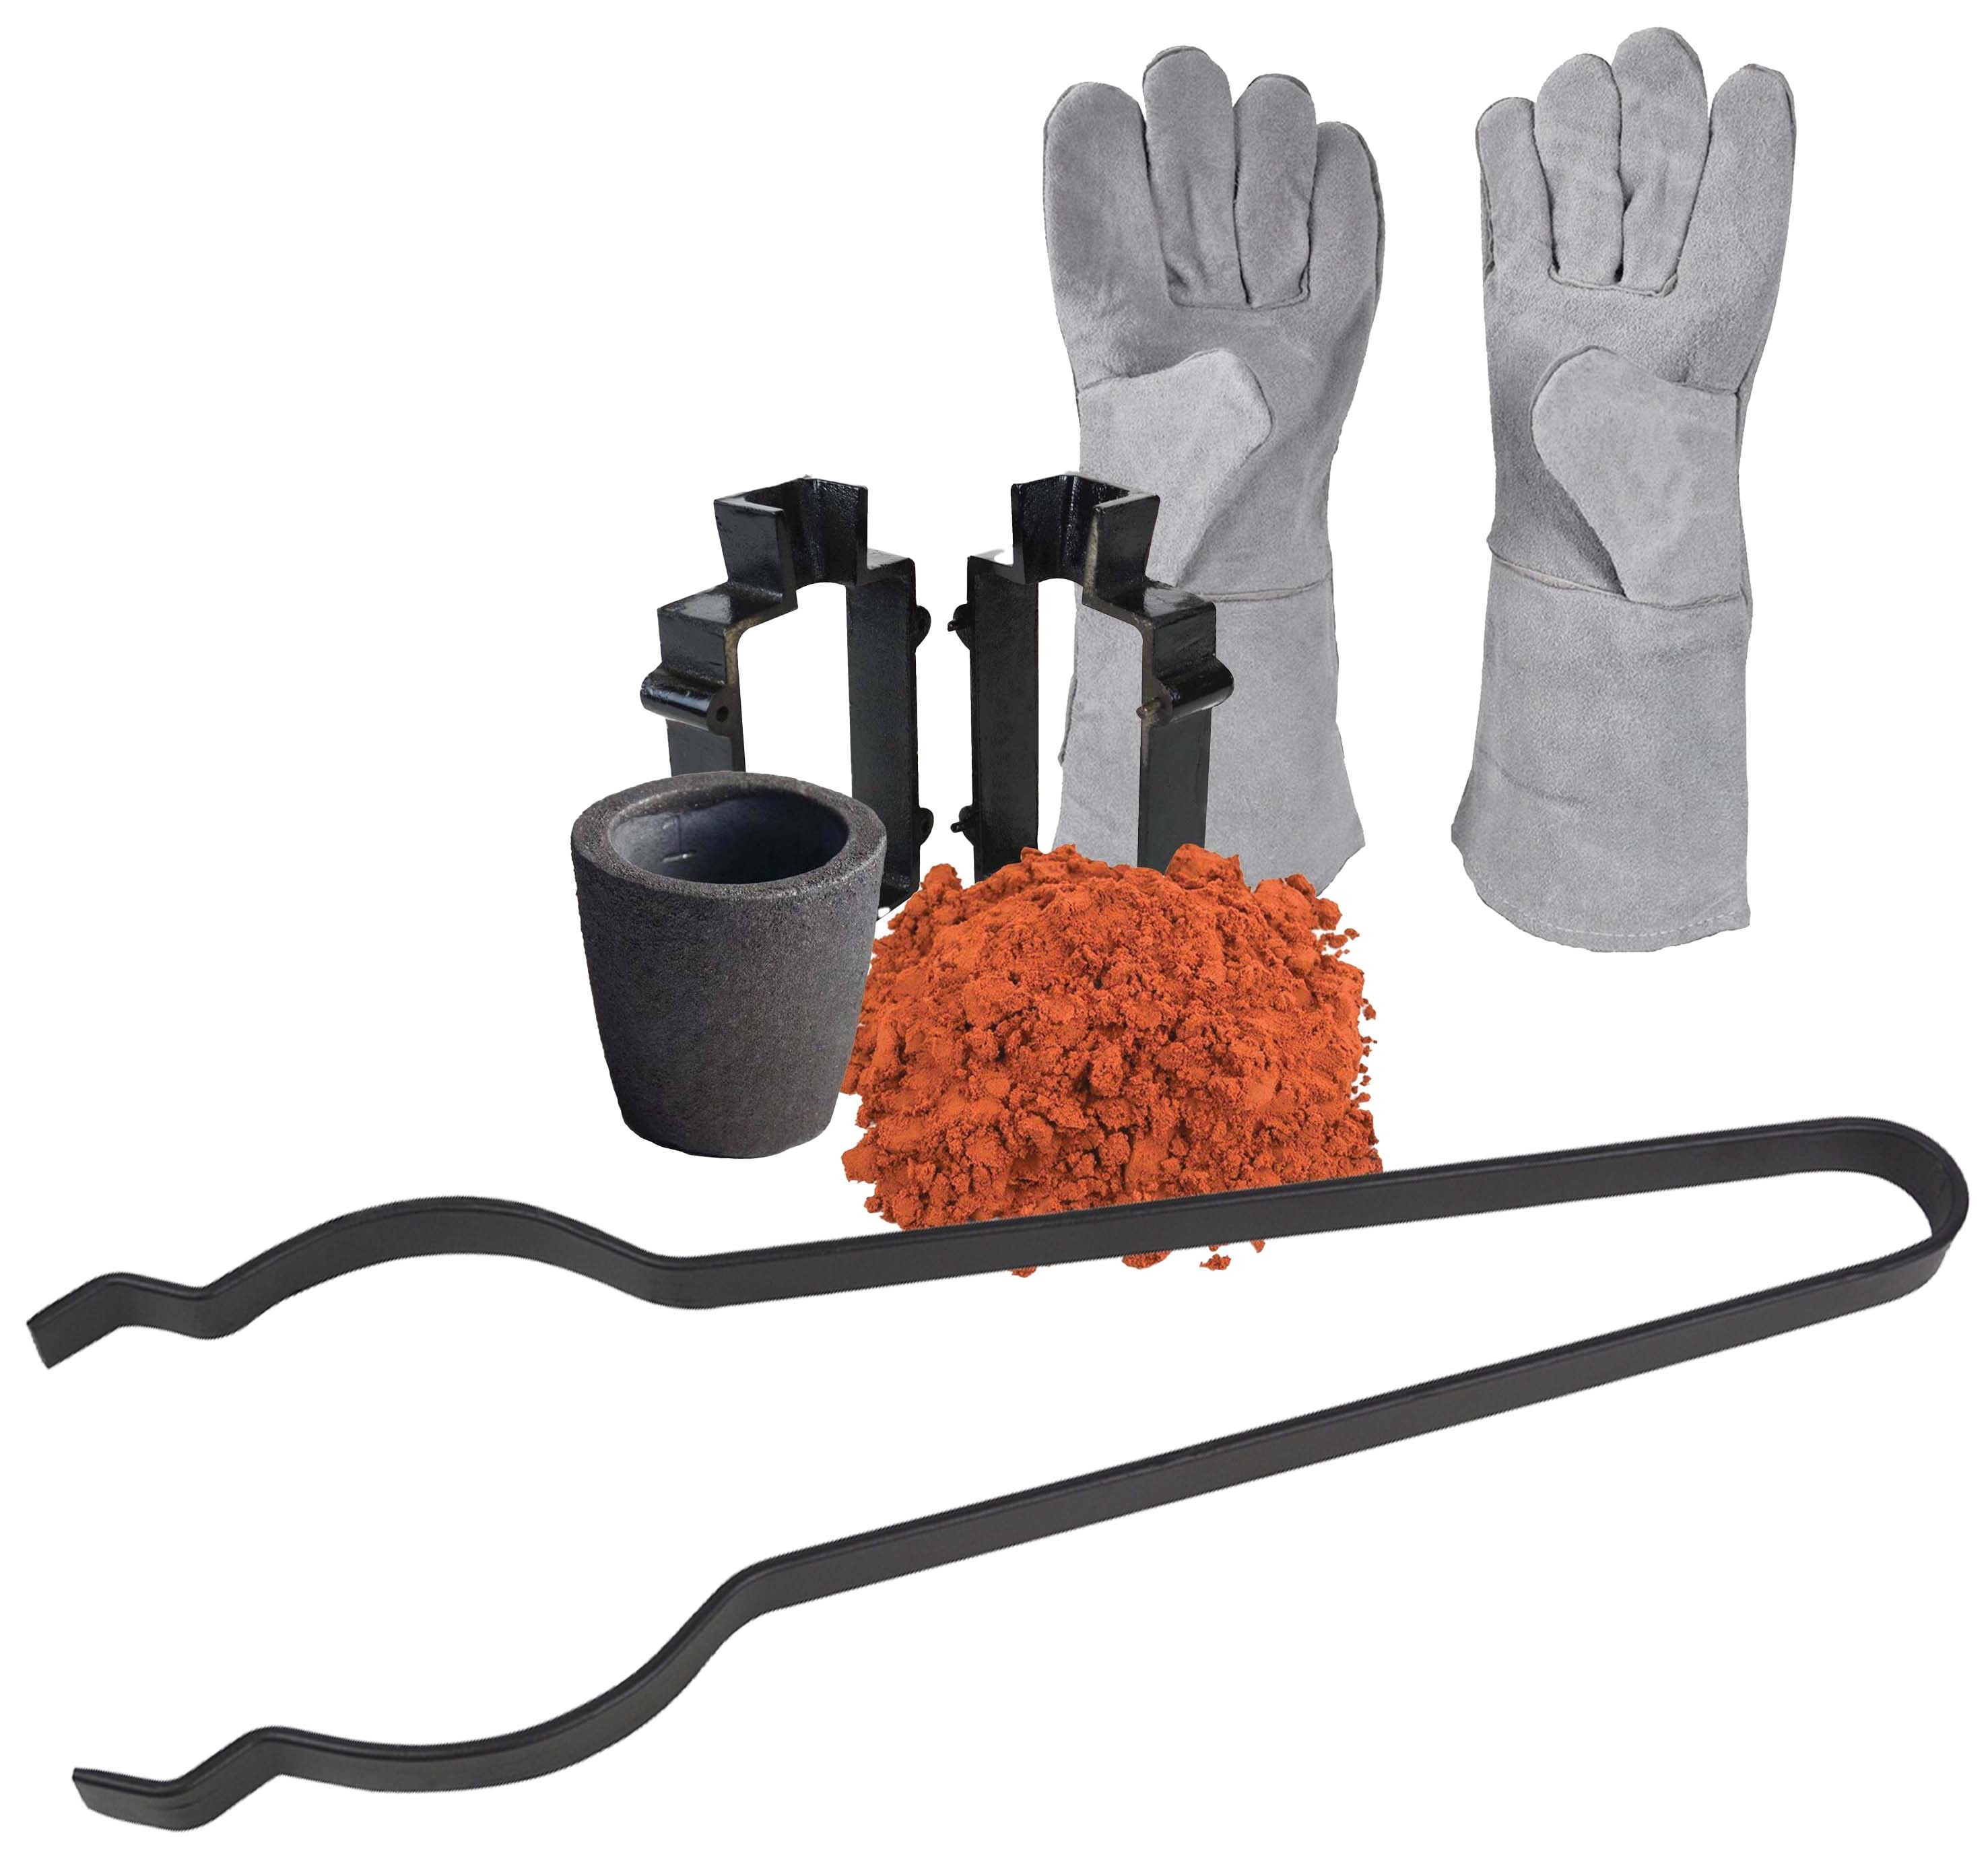 Sand Casting Set with 4.4 Lbs of Delft Clay Sand, Cast Iron Mold Flask  Frame,1 Kg Foundry Graphite Crucible,Tongs and Gloves, KIT-0258